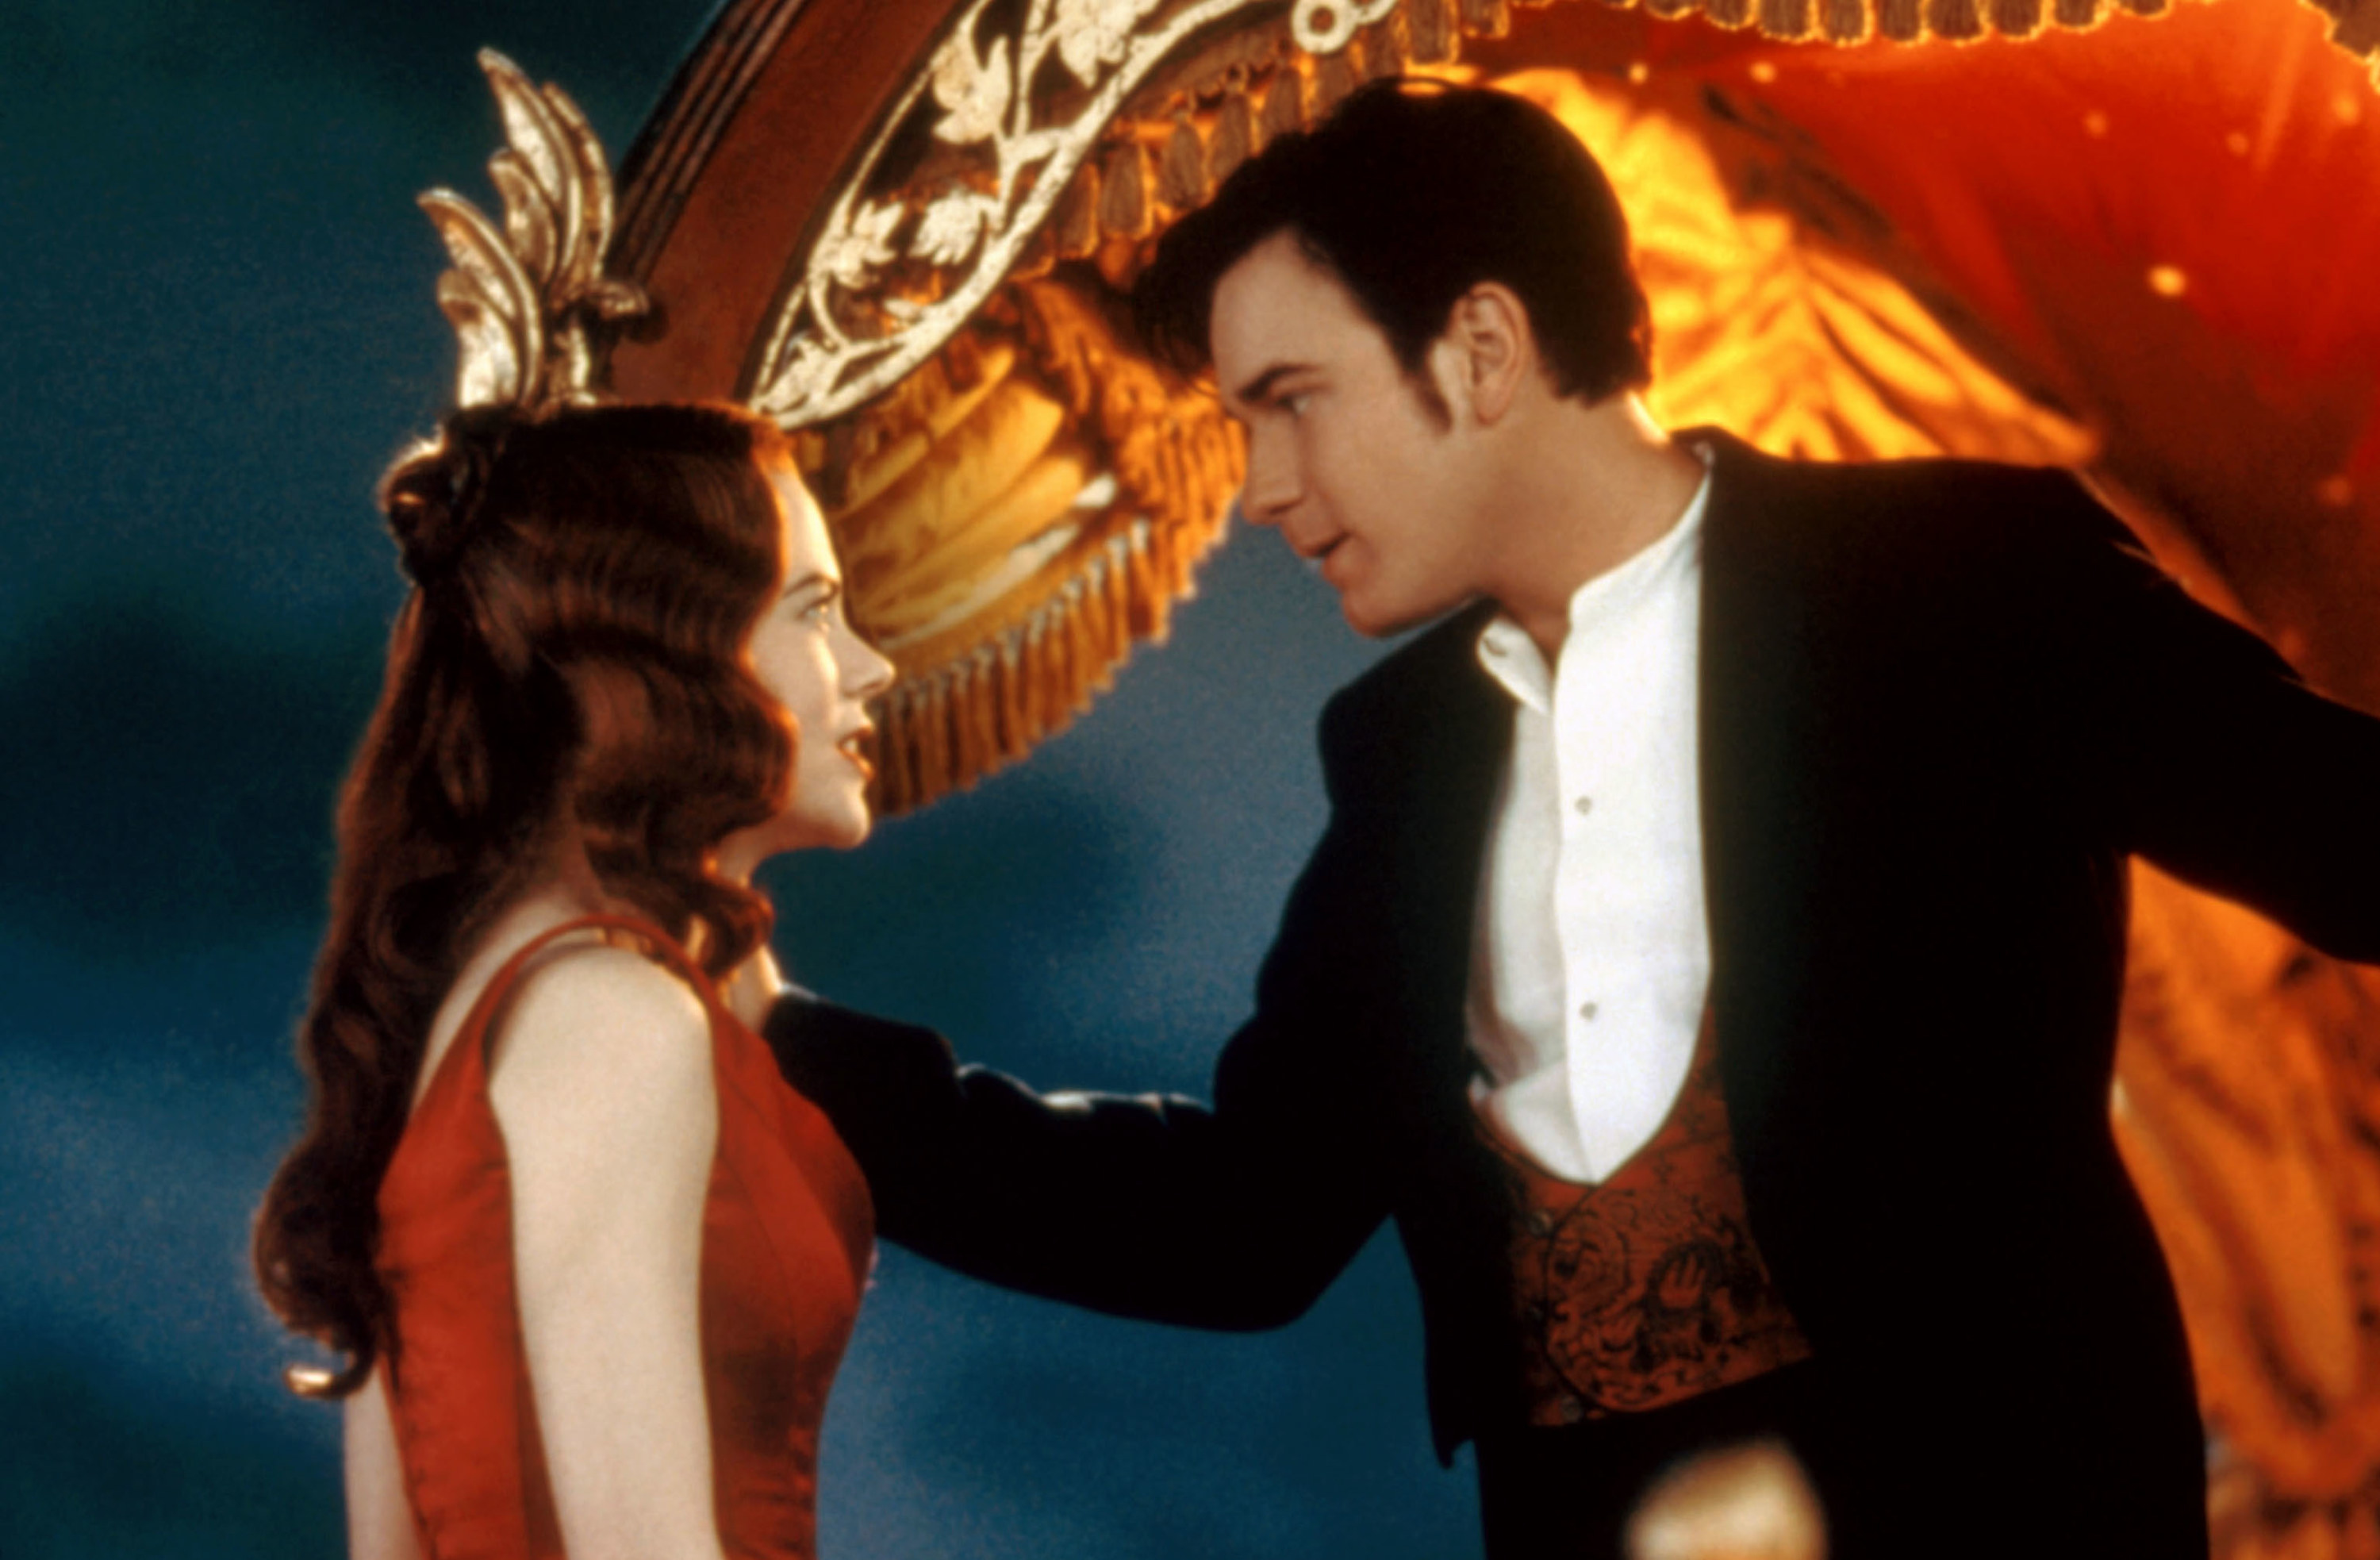 Satine and Christian singing on top of the elephant